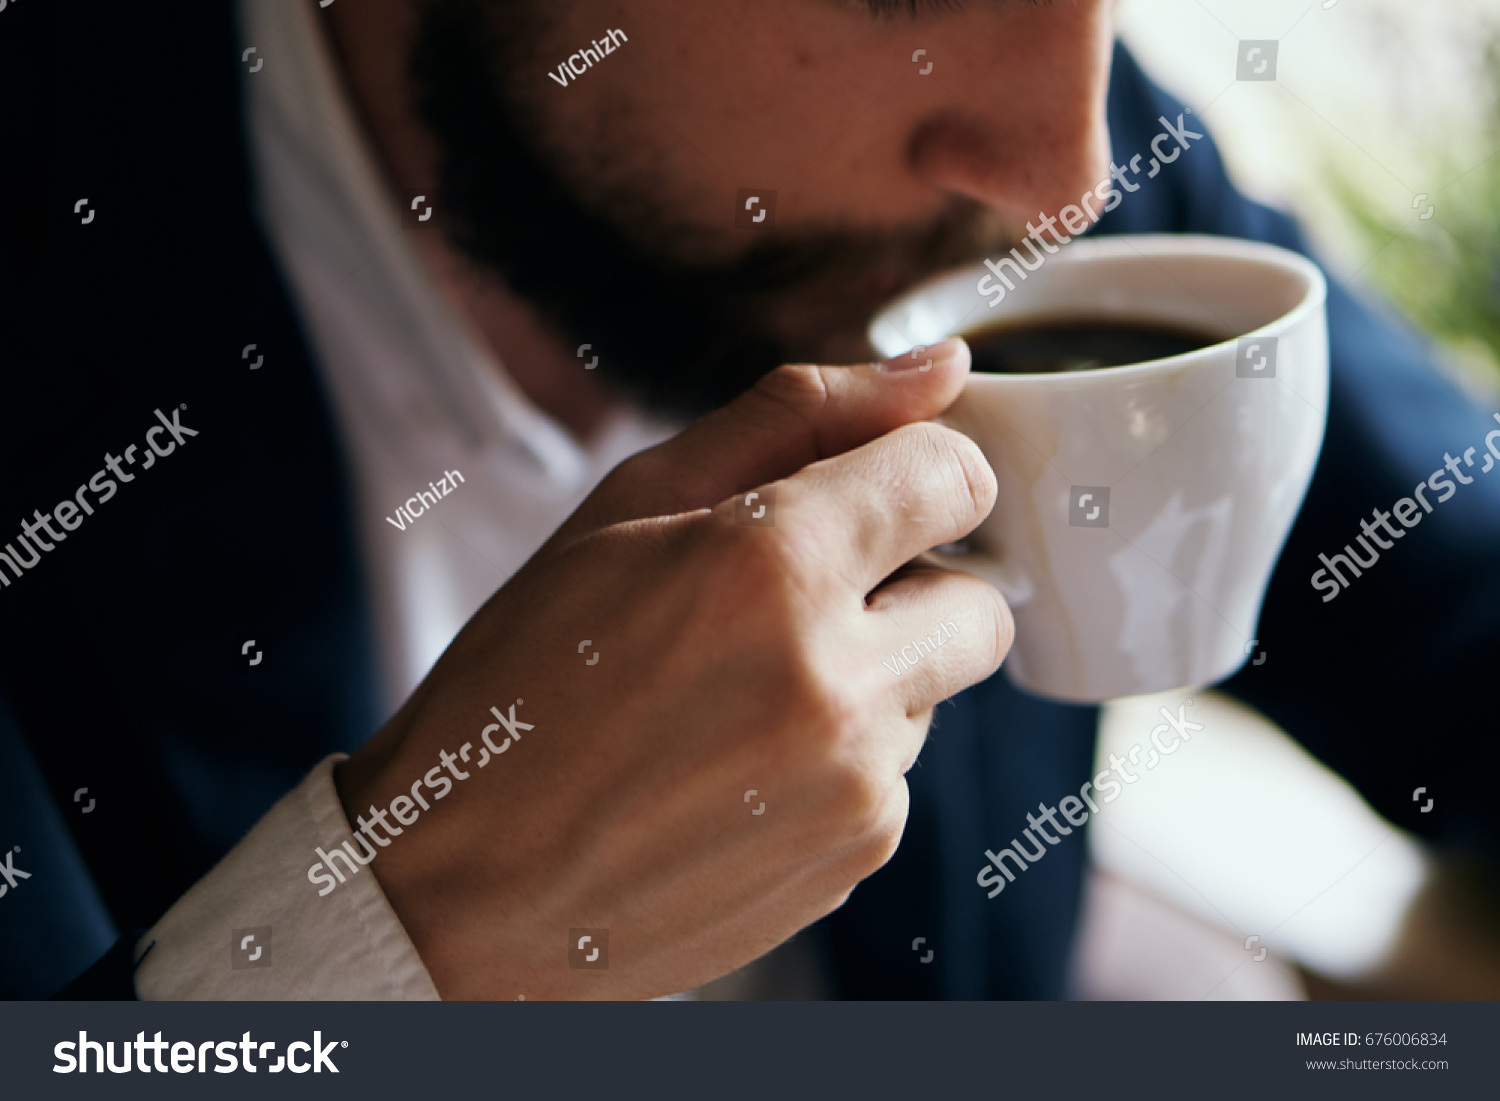 Business man drinking coffee in a cafe                                #676006834